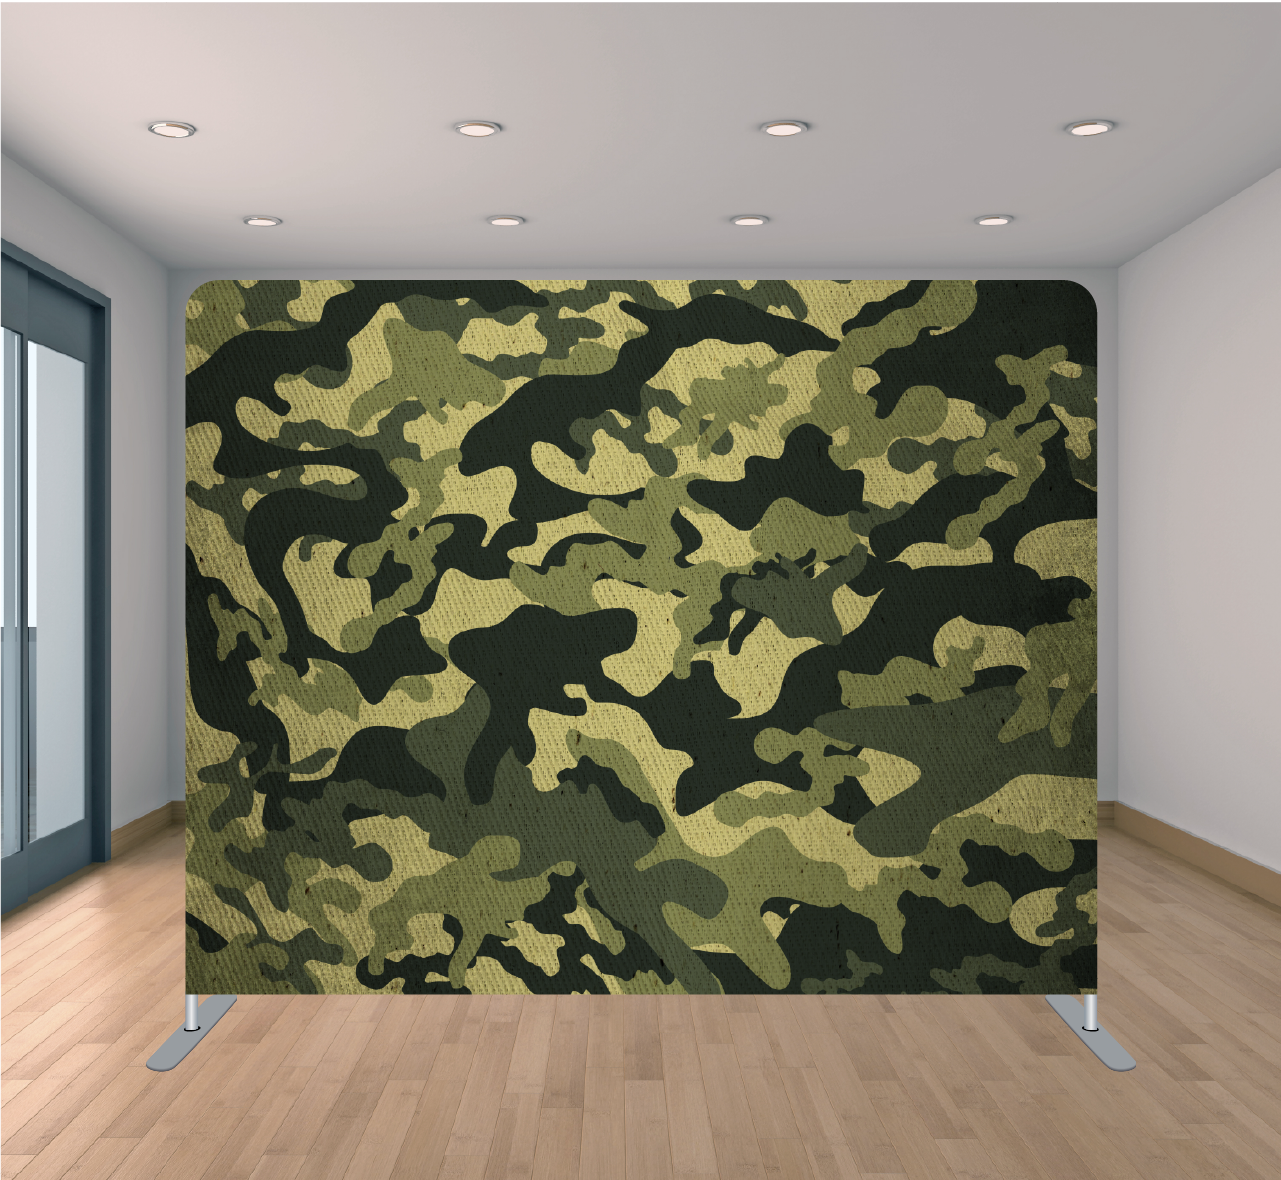 8X8ft Pillowcase Tension Backdrop- Camouflage